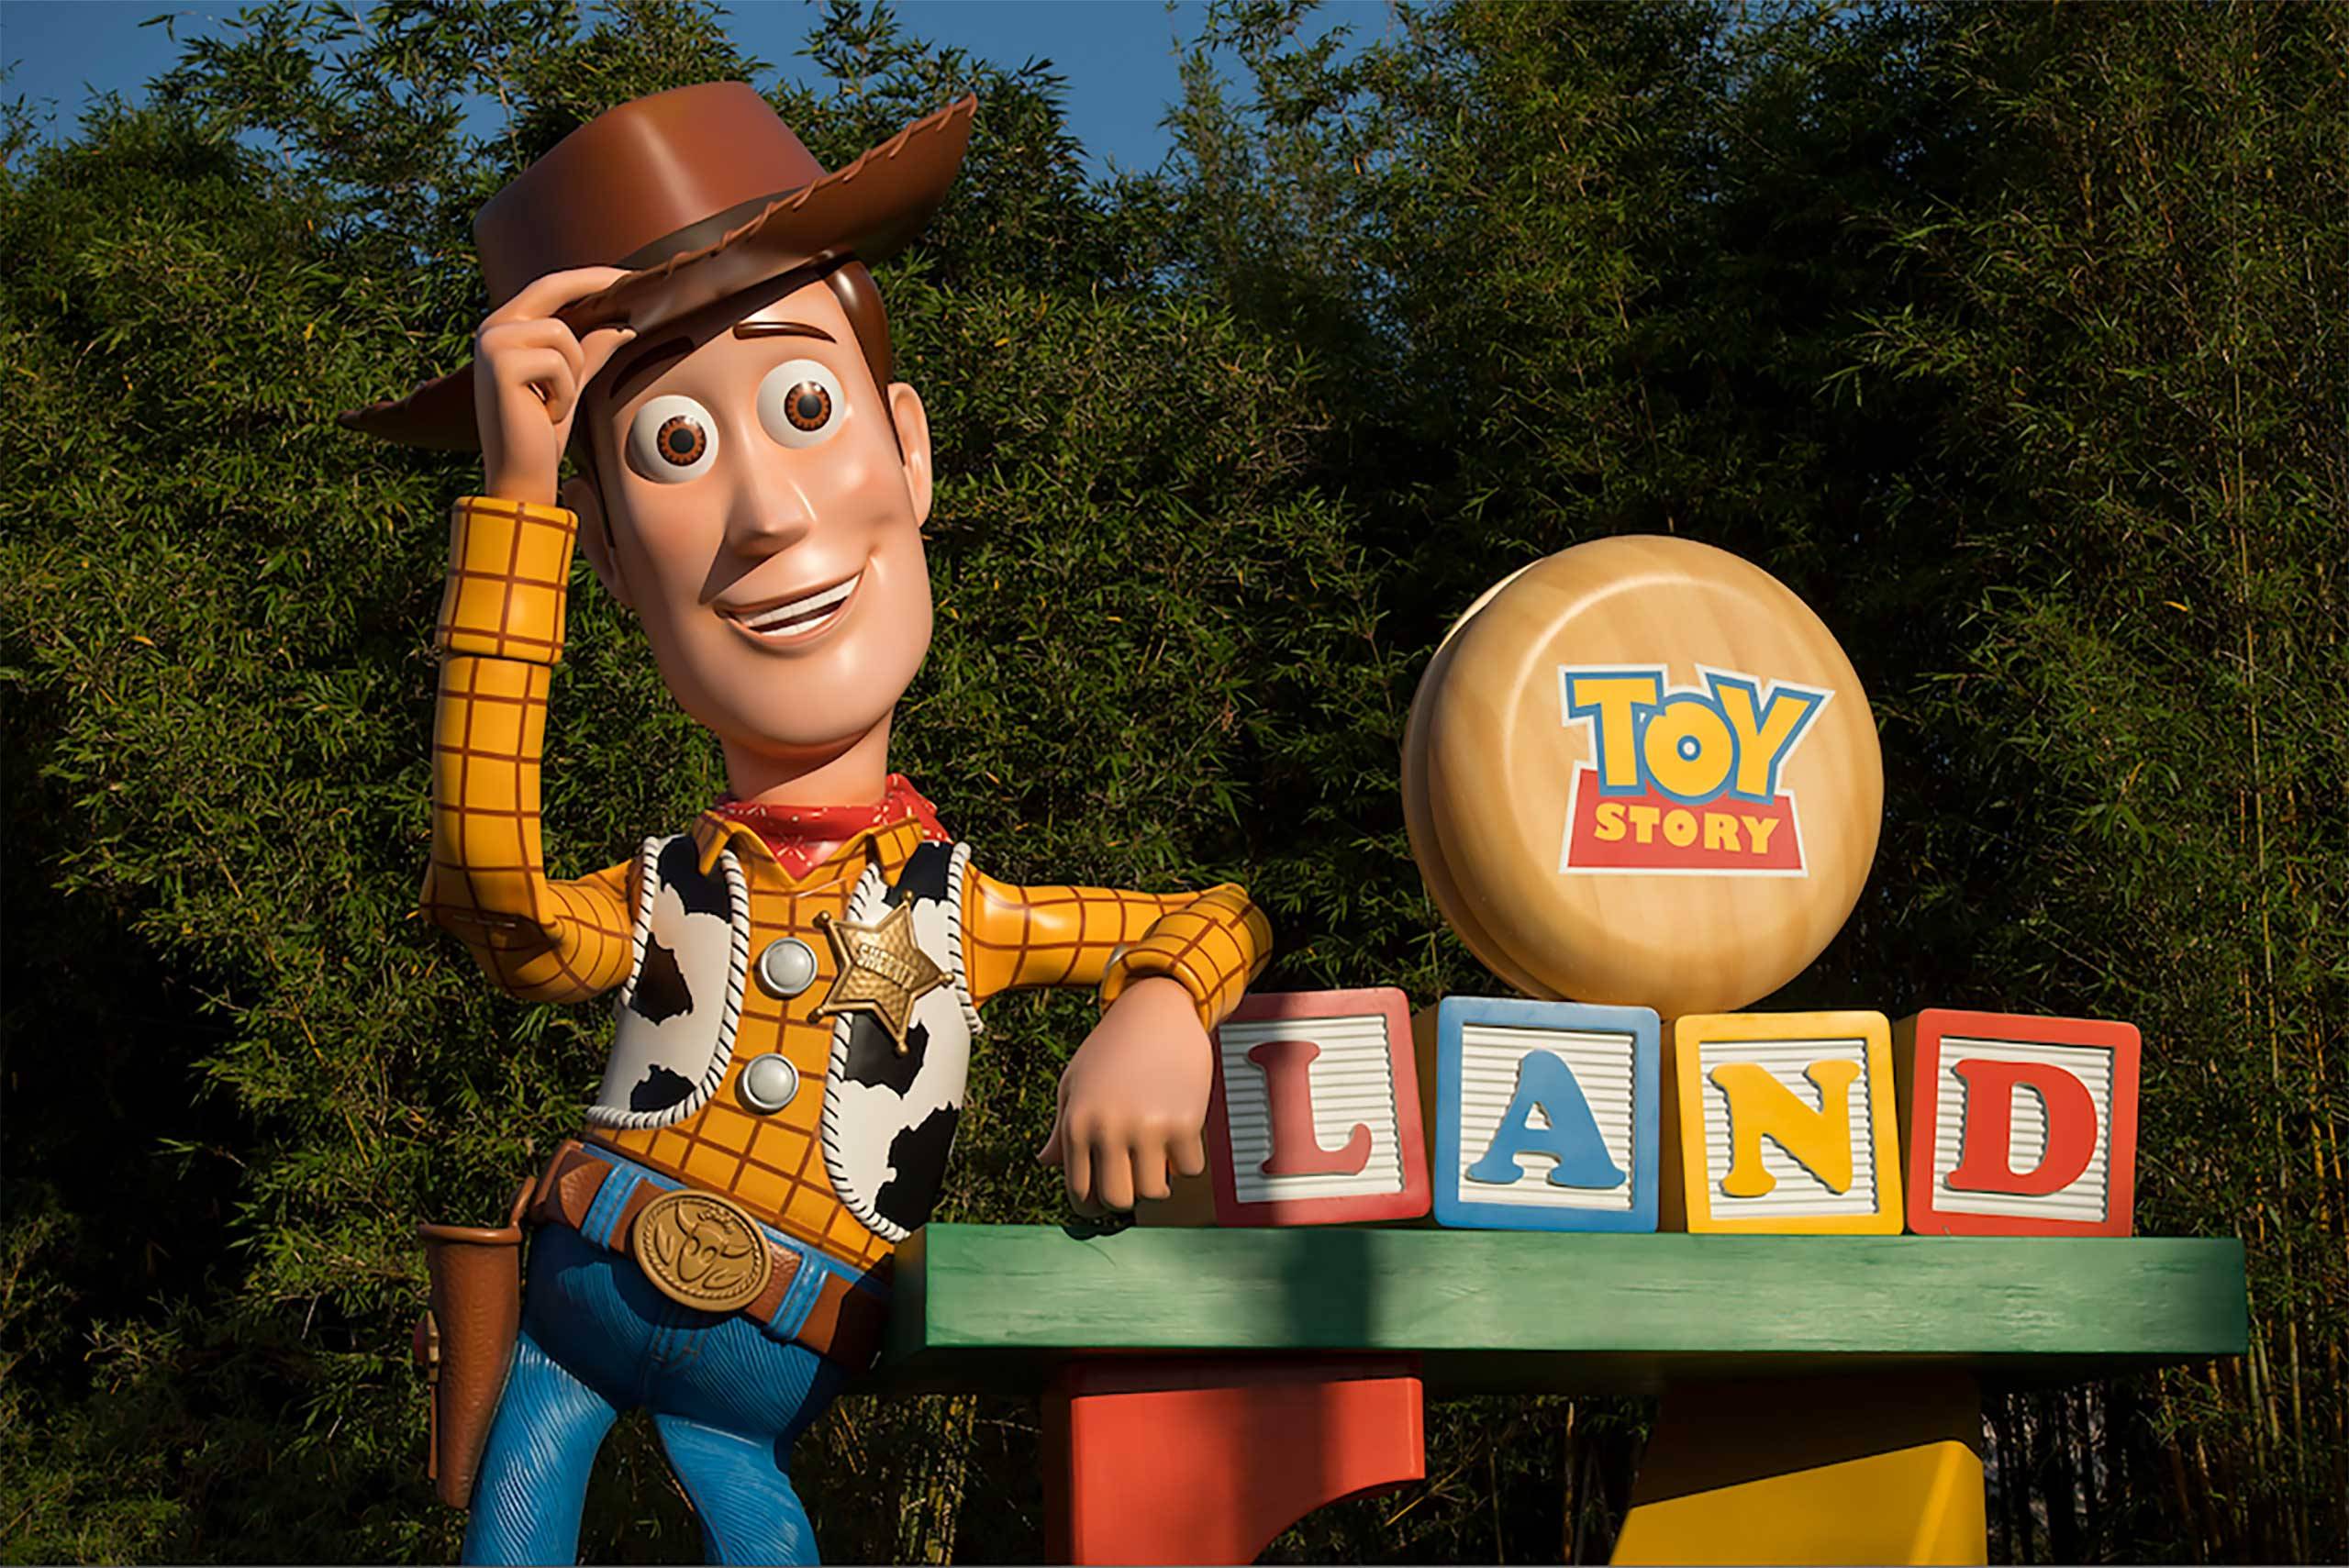 PHOTOS - First look at the Toy Story Land entrance marquee